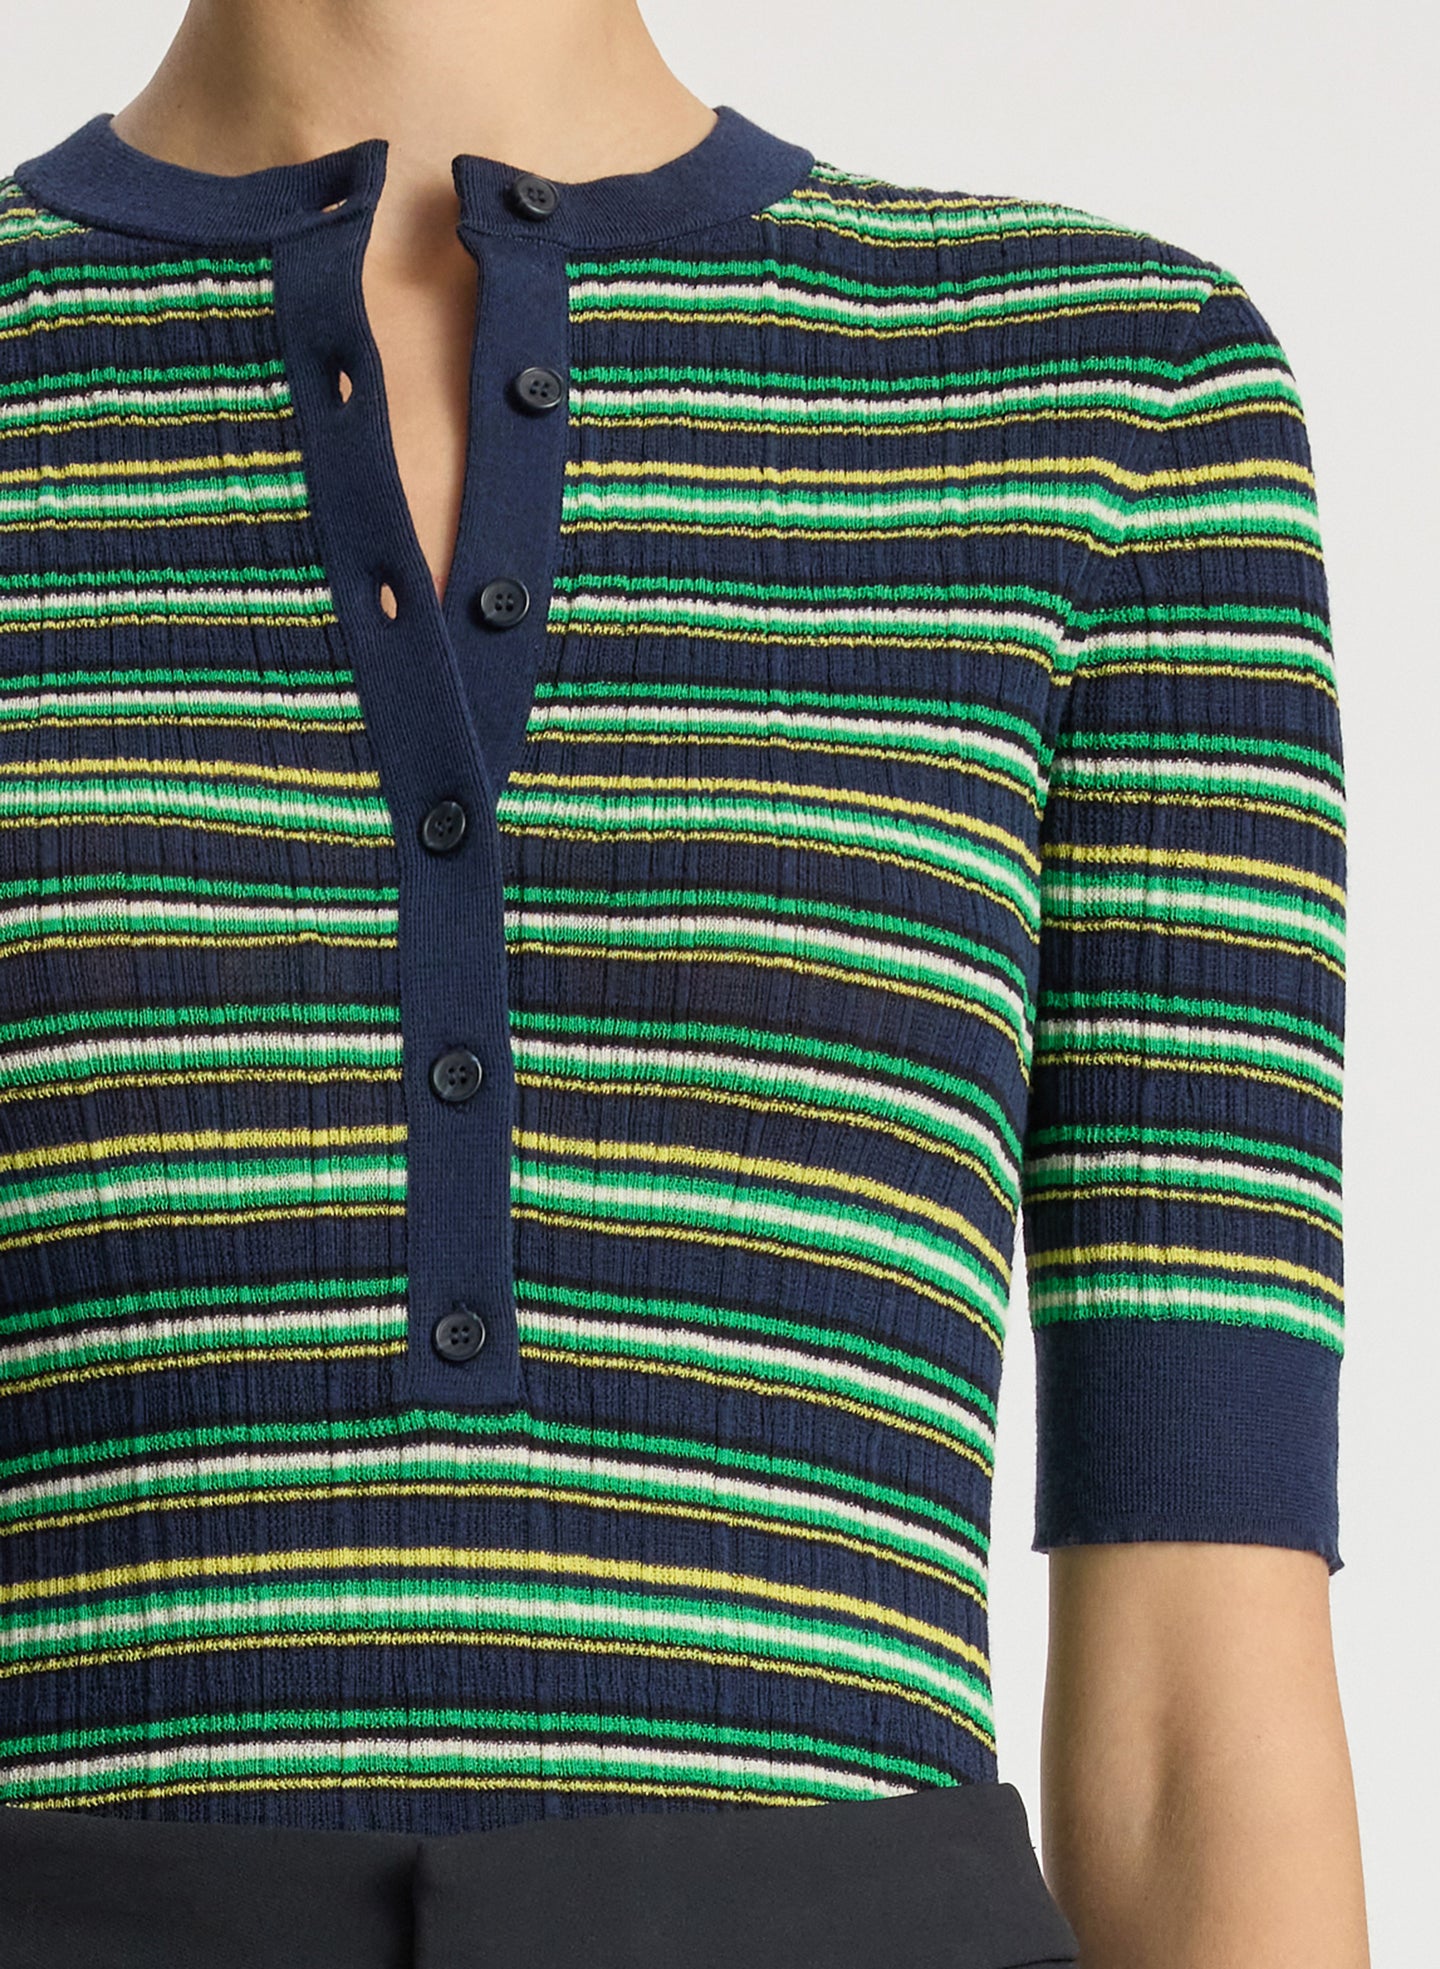 detail  view of woman wearing navy blue and green striped half sleeve button placket shirt and black pant